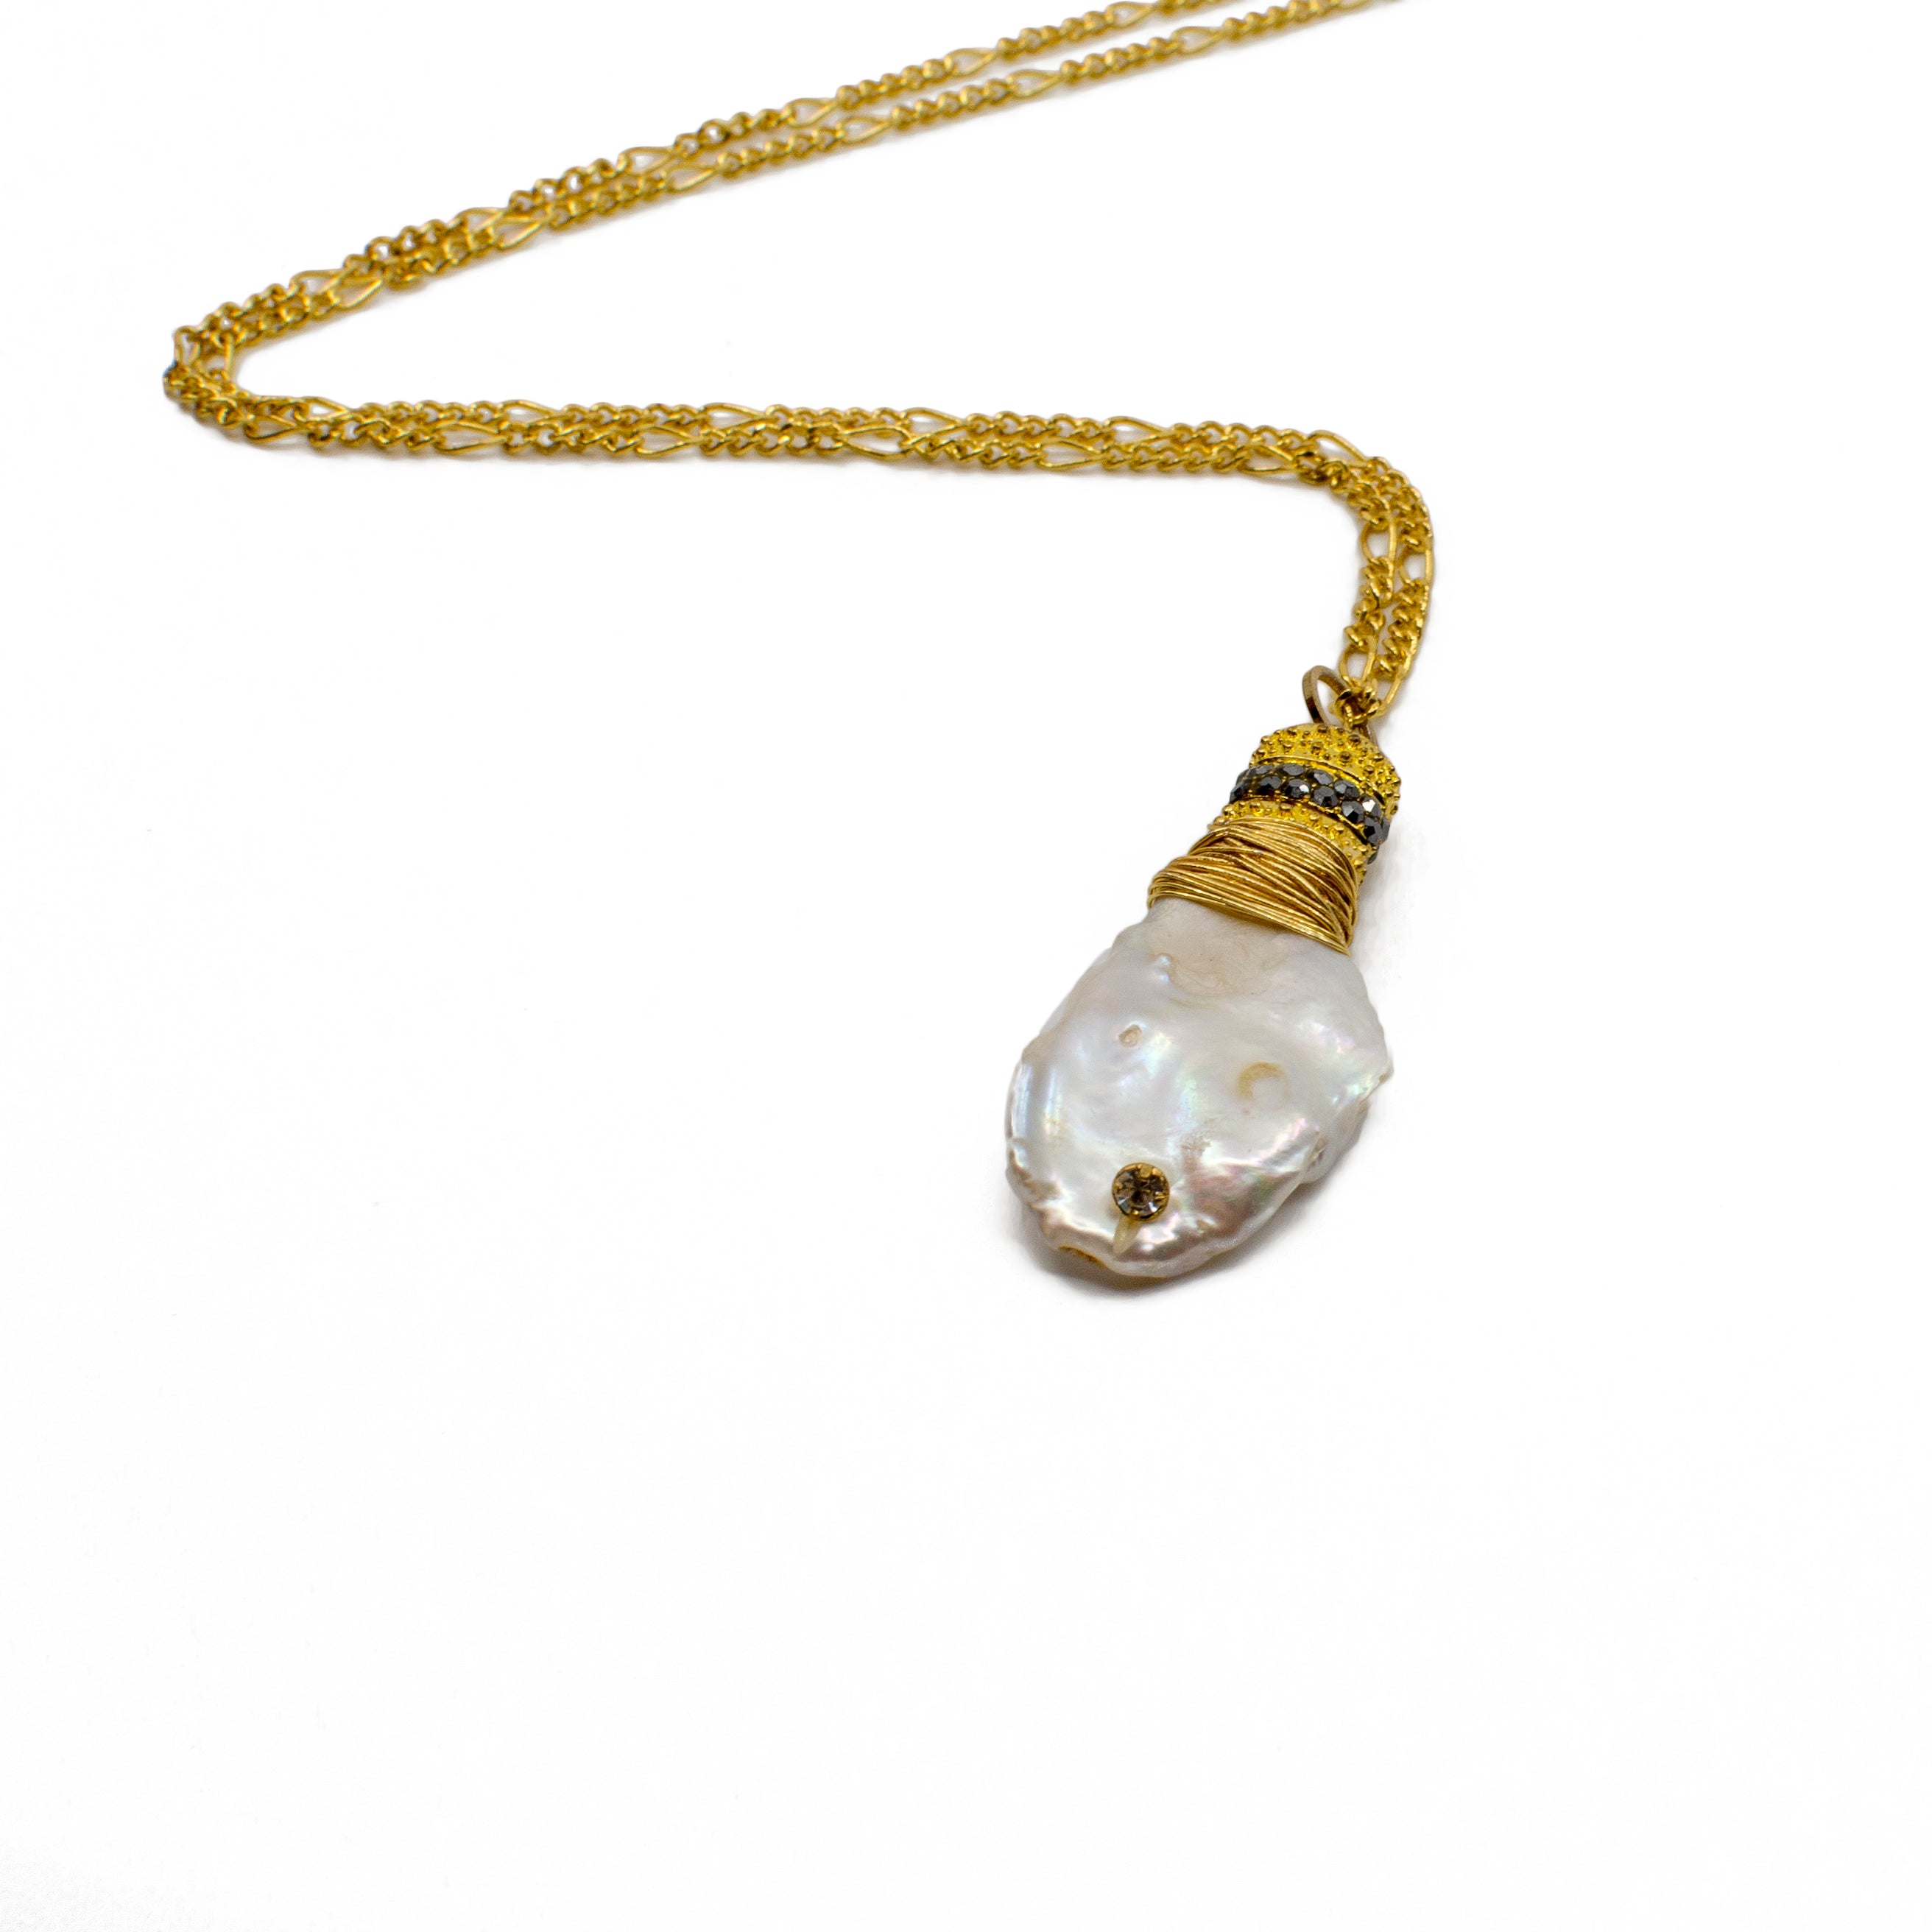 White Baroque Pearl Pendant on Gold Plated Chain